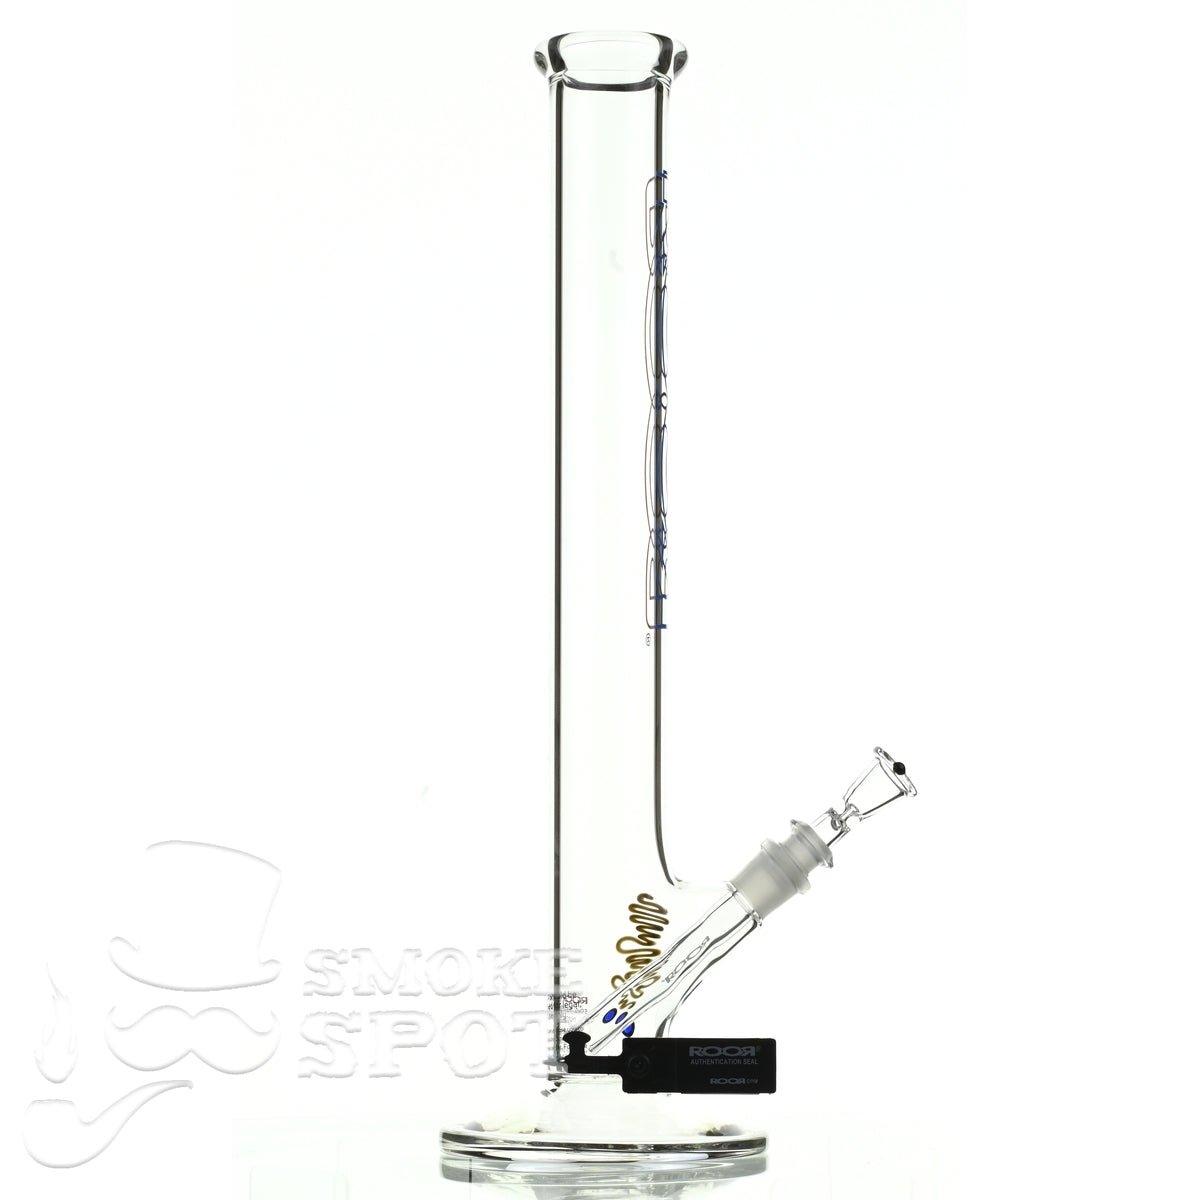 Roor Straight Tube 18 inch P-D red blue outline - Smoke Spot Smoke Shop